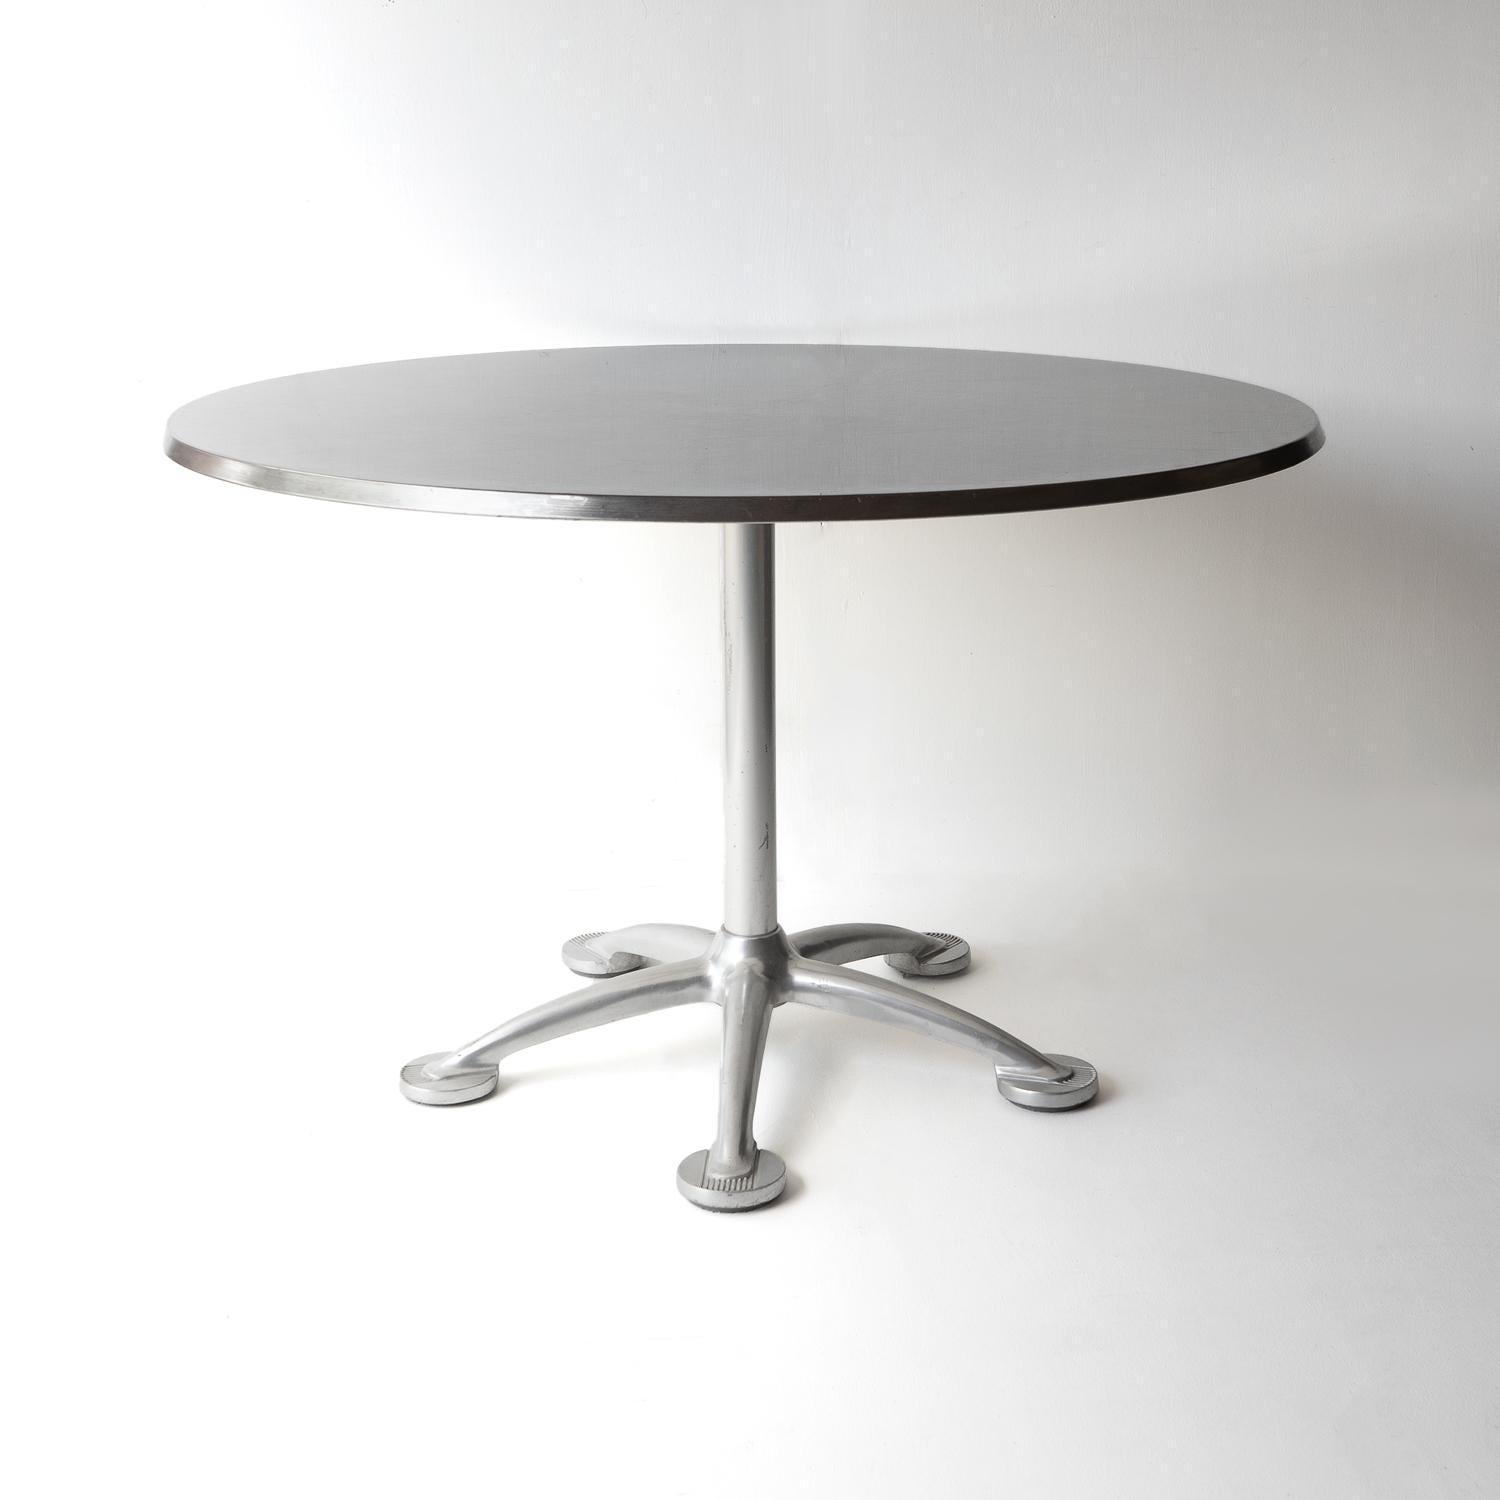 VINTAGE ALUMINIUM AND STEEL DINING TABLE

We have eight of these tables in stock, available to purchase individually. The price is per table.

An iconic post-modern design by award-winning Spanish designer Jorge Pensi. Originally designed in the